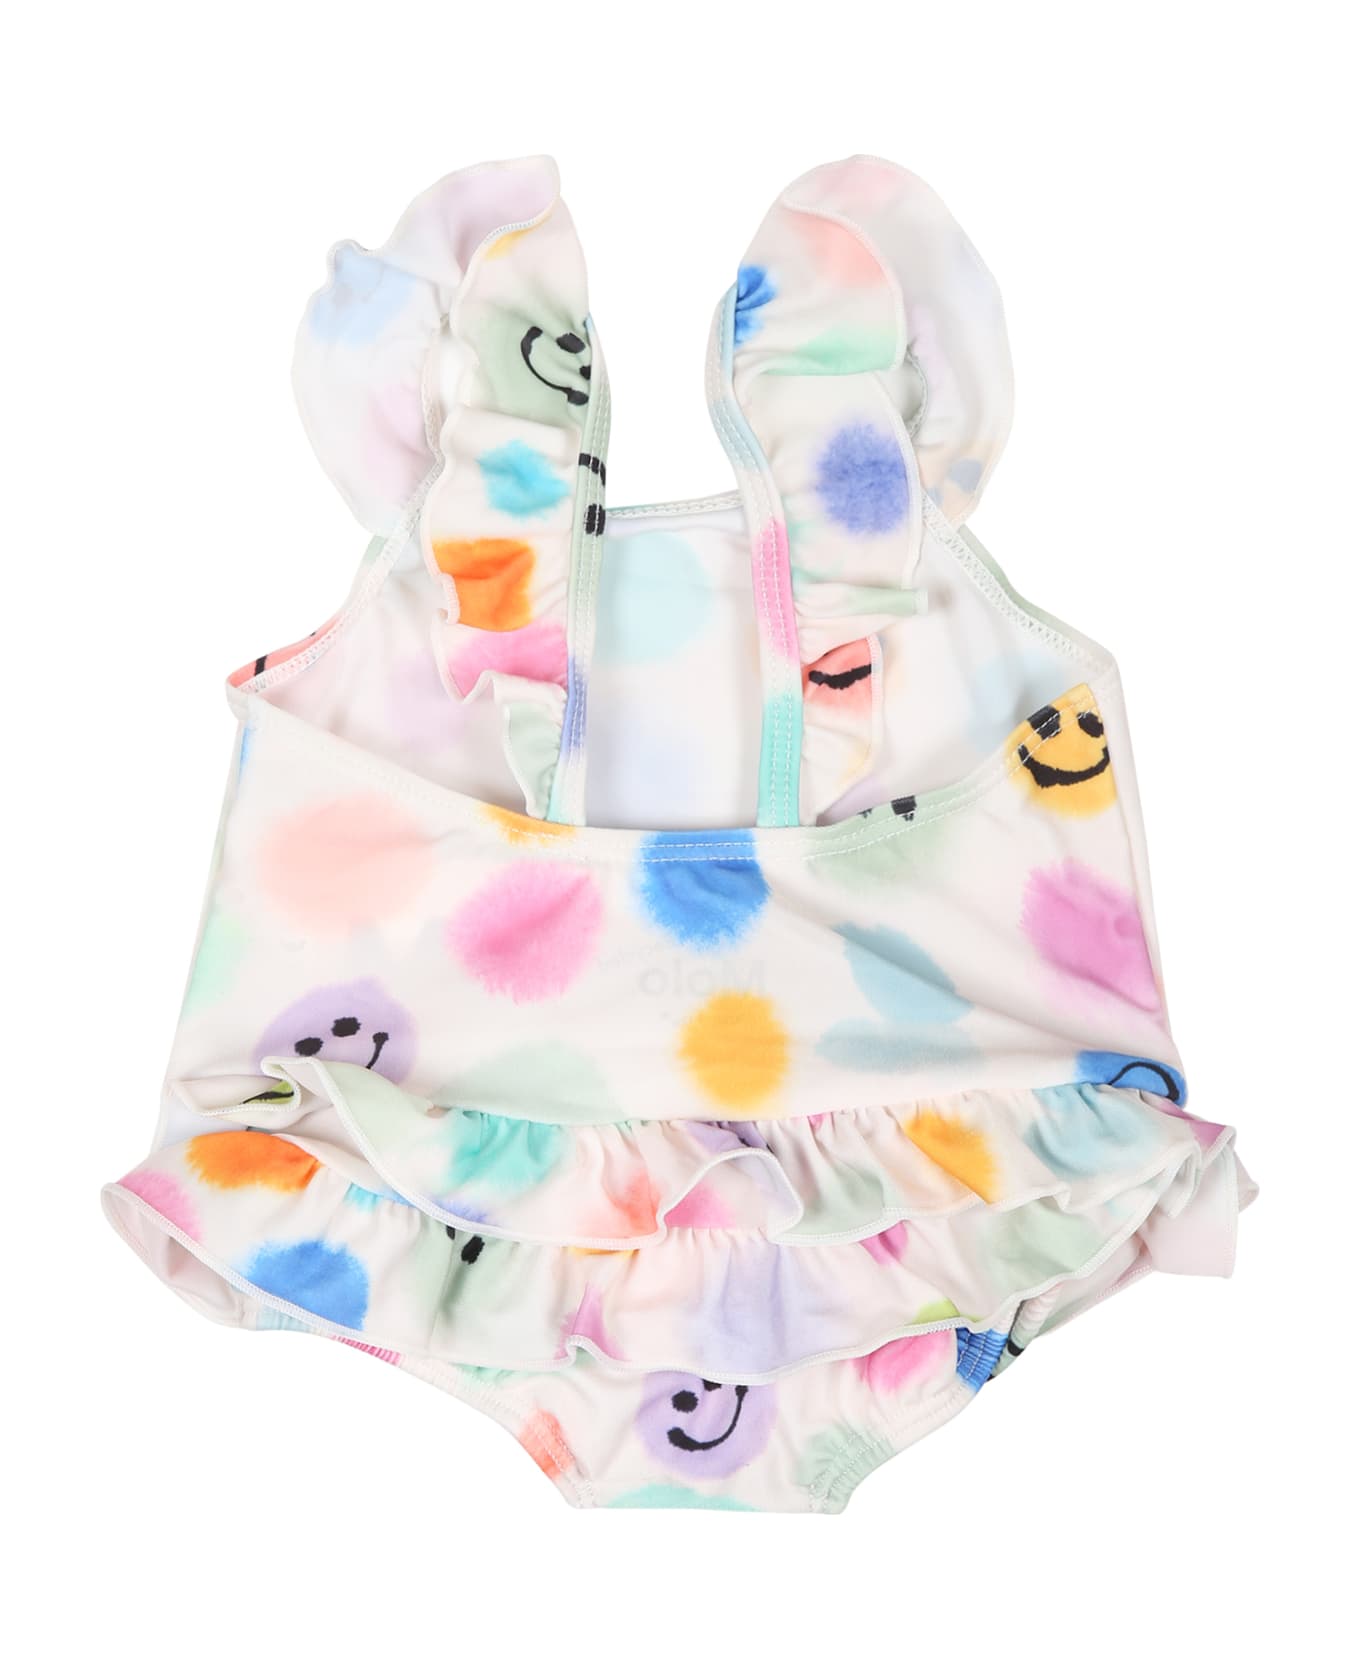 Molo White Swimsuit For Baby Girl With Polka Dots And Smile - Multicolor 水着